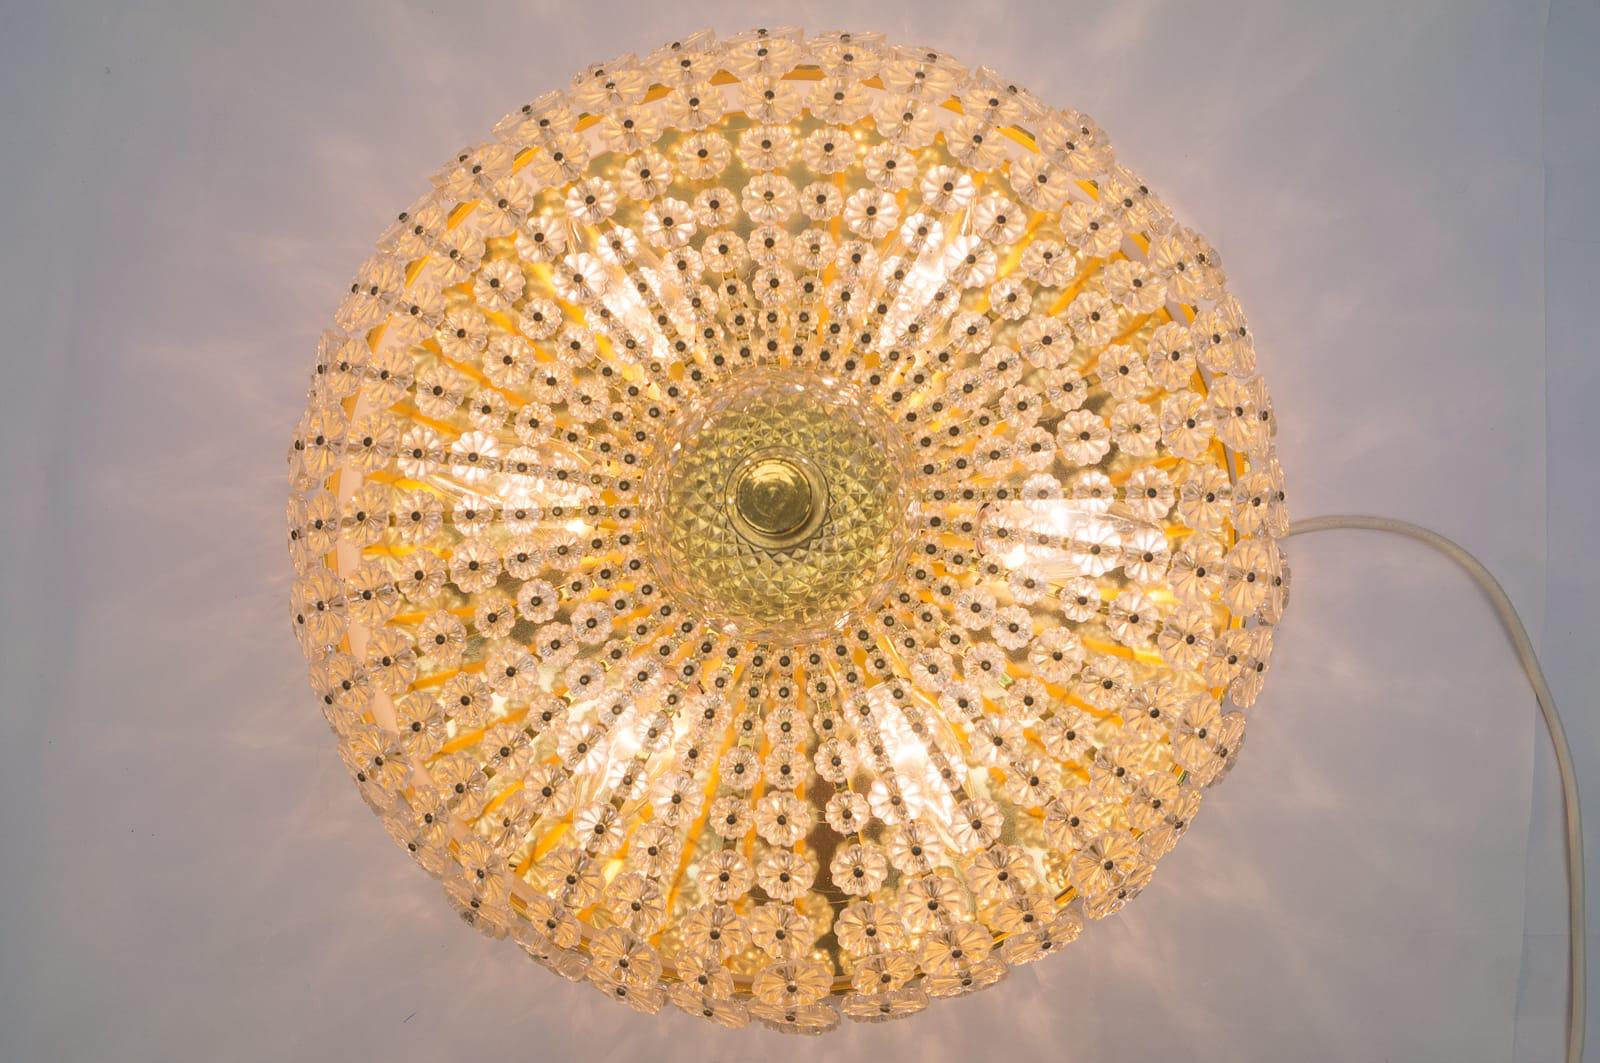 Stylish original midcentury floral glass wall and ceiling lamp.
Eight E14 bulbs on a brass plate.
Very good vintage condition with normal signs of use and great patina.
100% original condition and fully functional.
All parts complete. All flowers